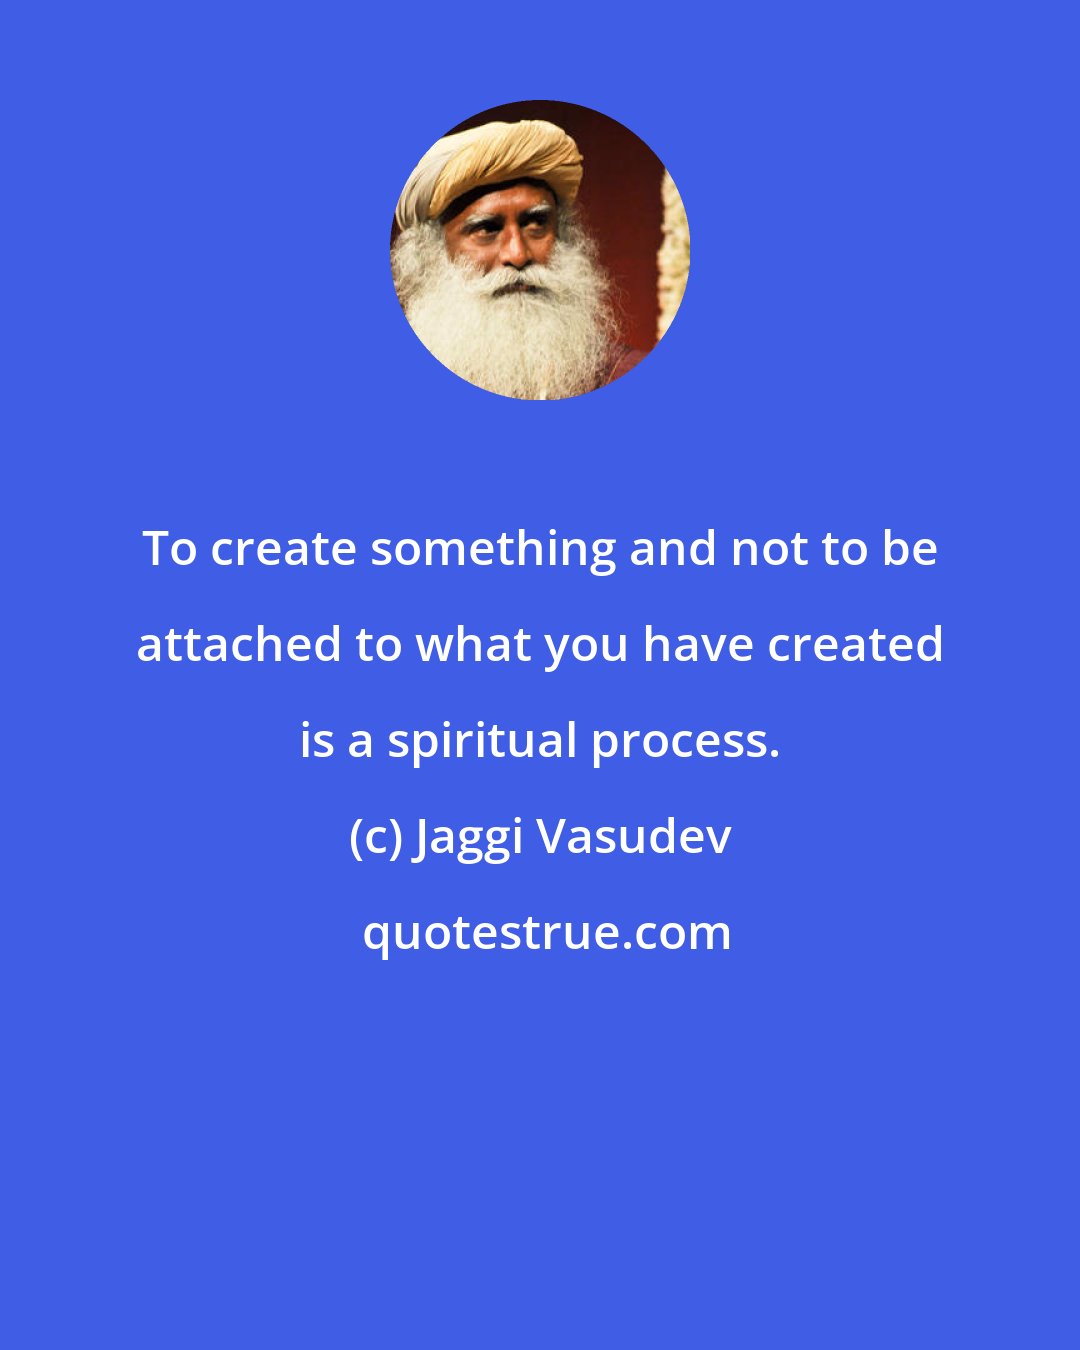 Jaggi Vasudev: To create something and not to be attached to what you have created is a spiritual process.